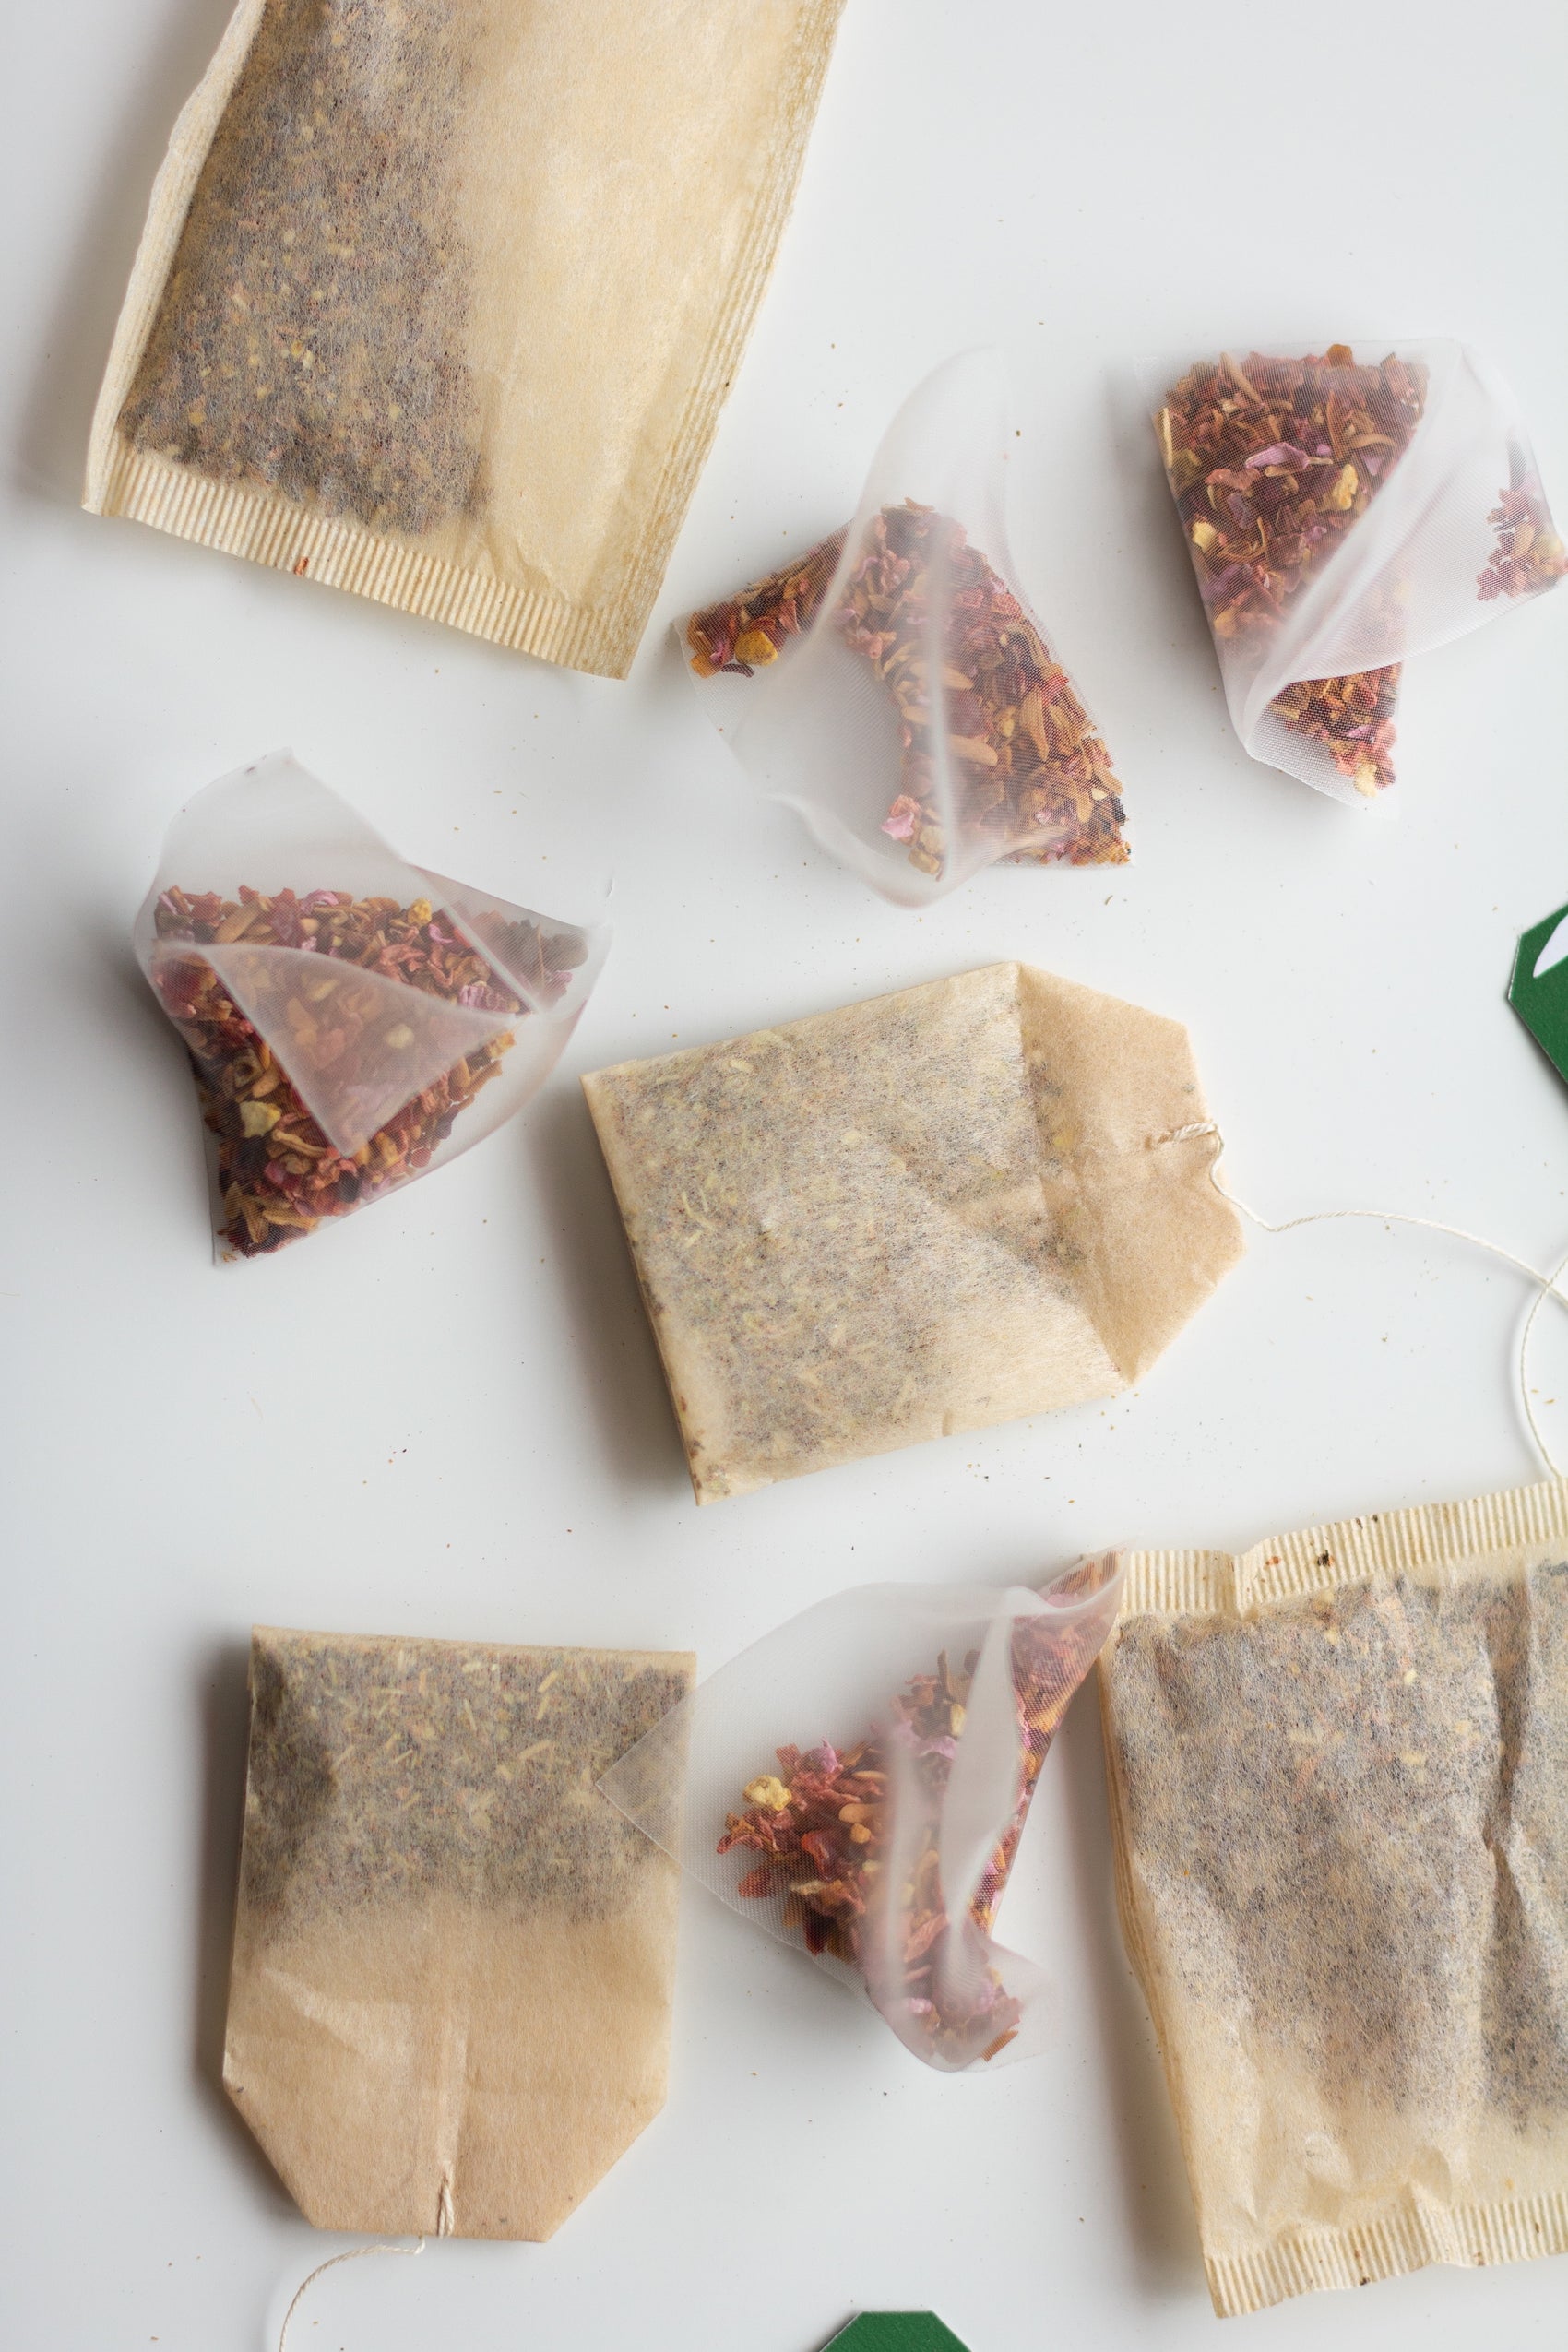 plastic free pyramid tea bags and classic teabags which contain microplastics